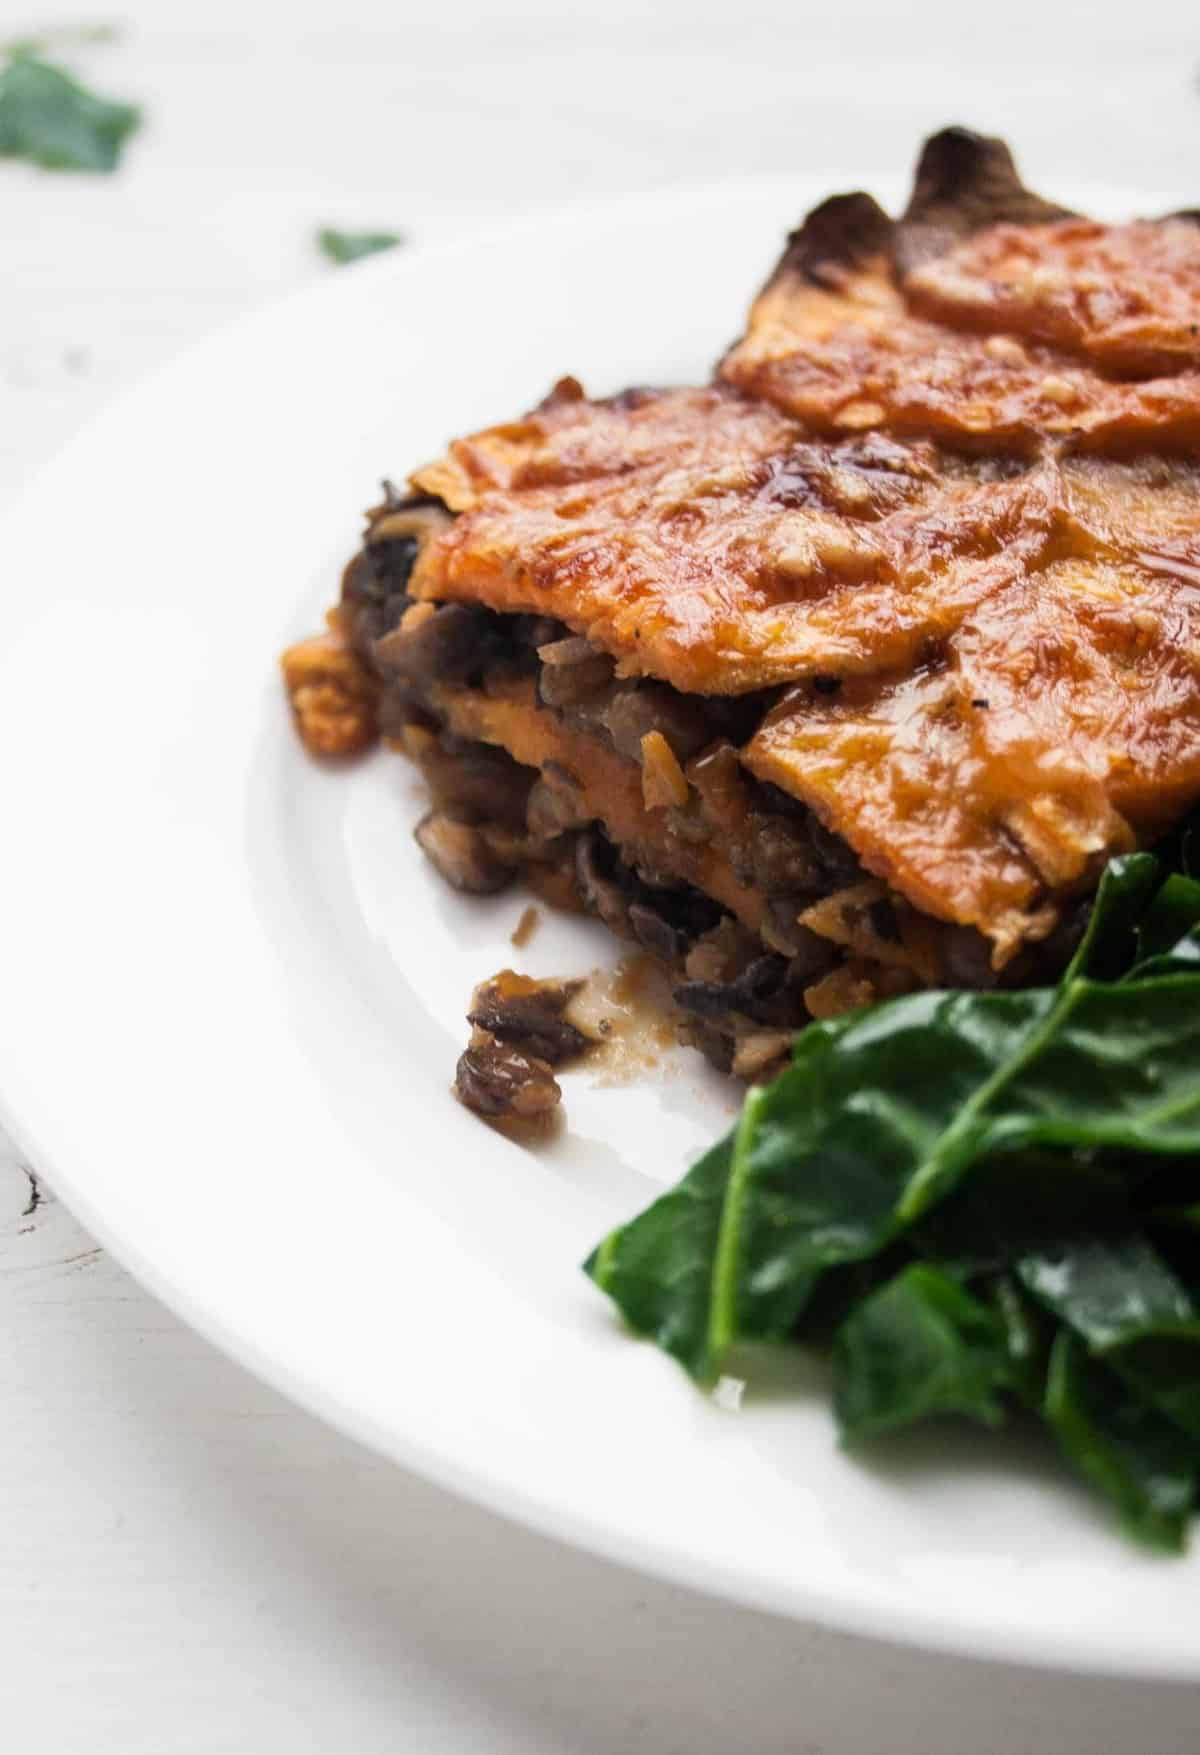 A serving of lentil and sweet potato lasagne on a plate with greens to the side.